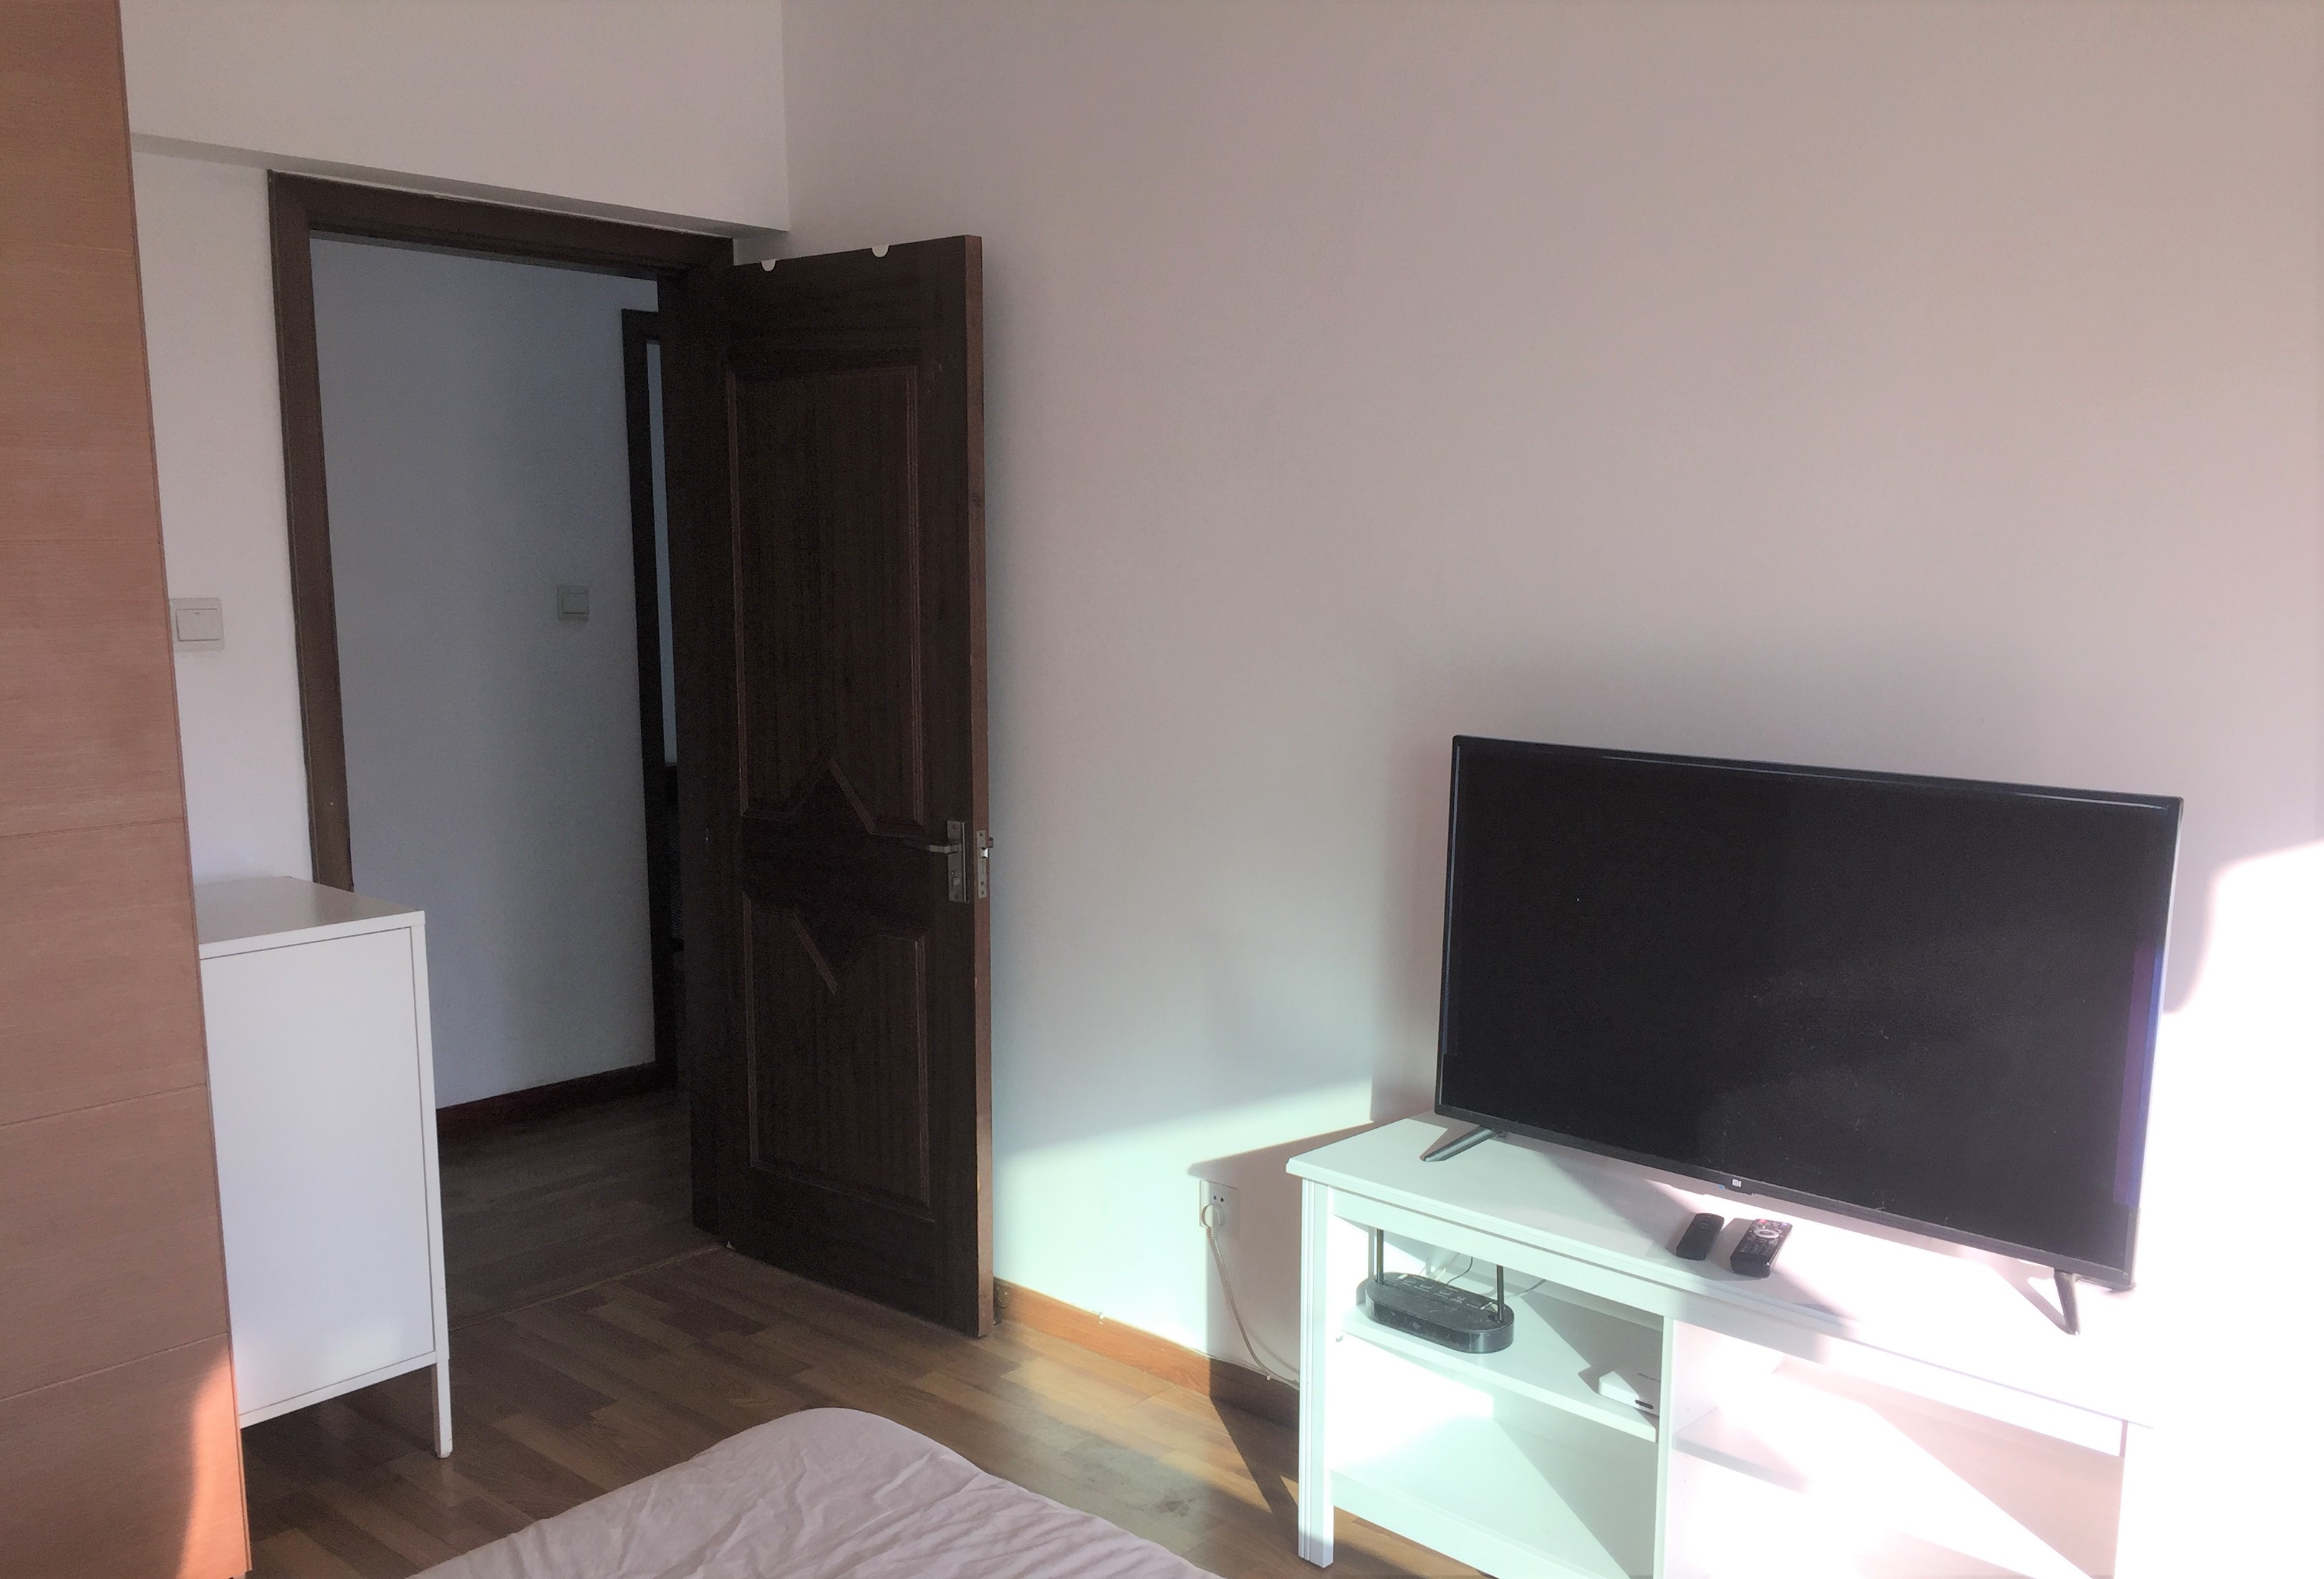 bright bedroom Great Value 2BR Top of City Apt for Rent in Shanghai Jing’an Near LN 2/12/13